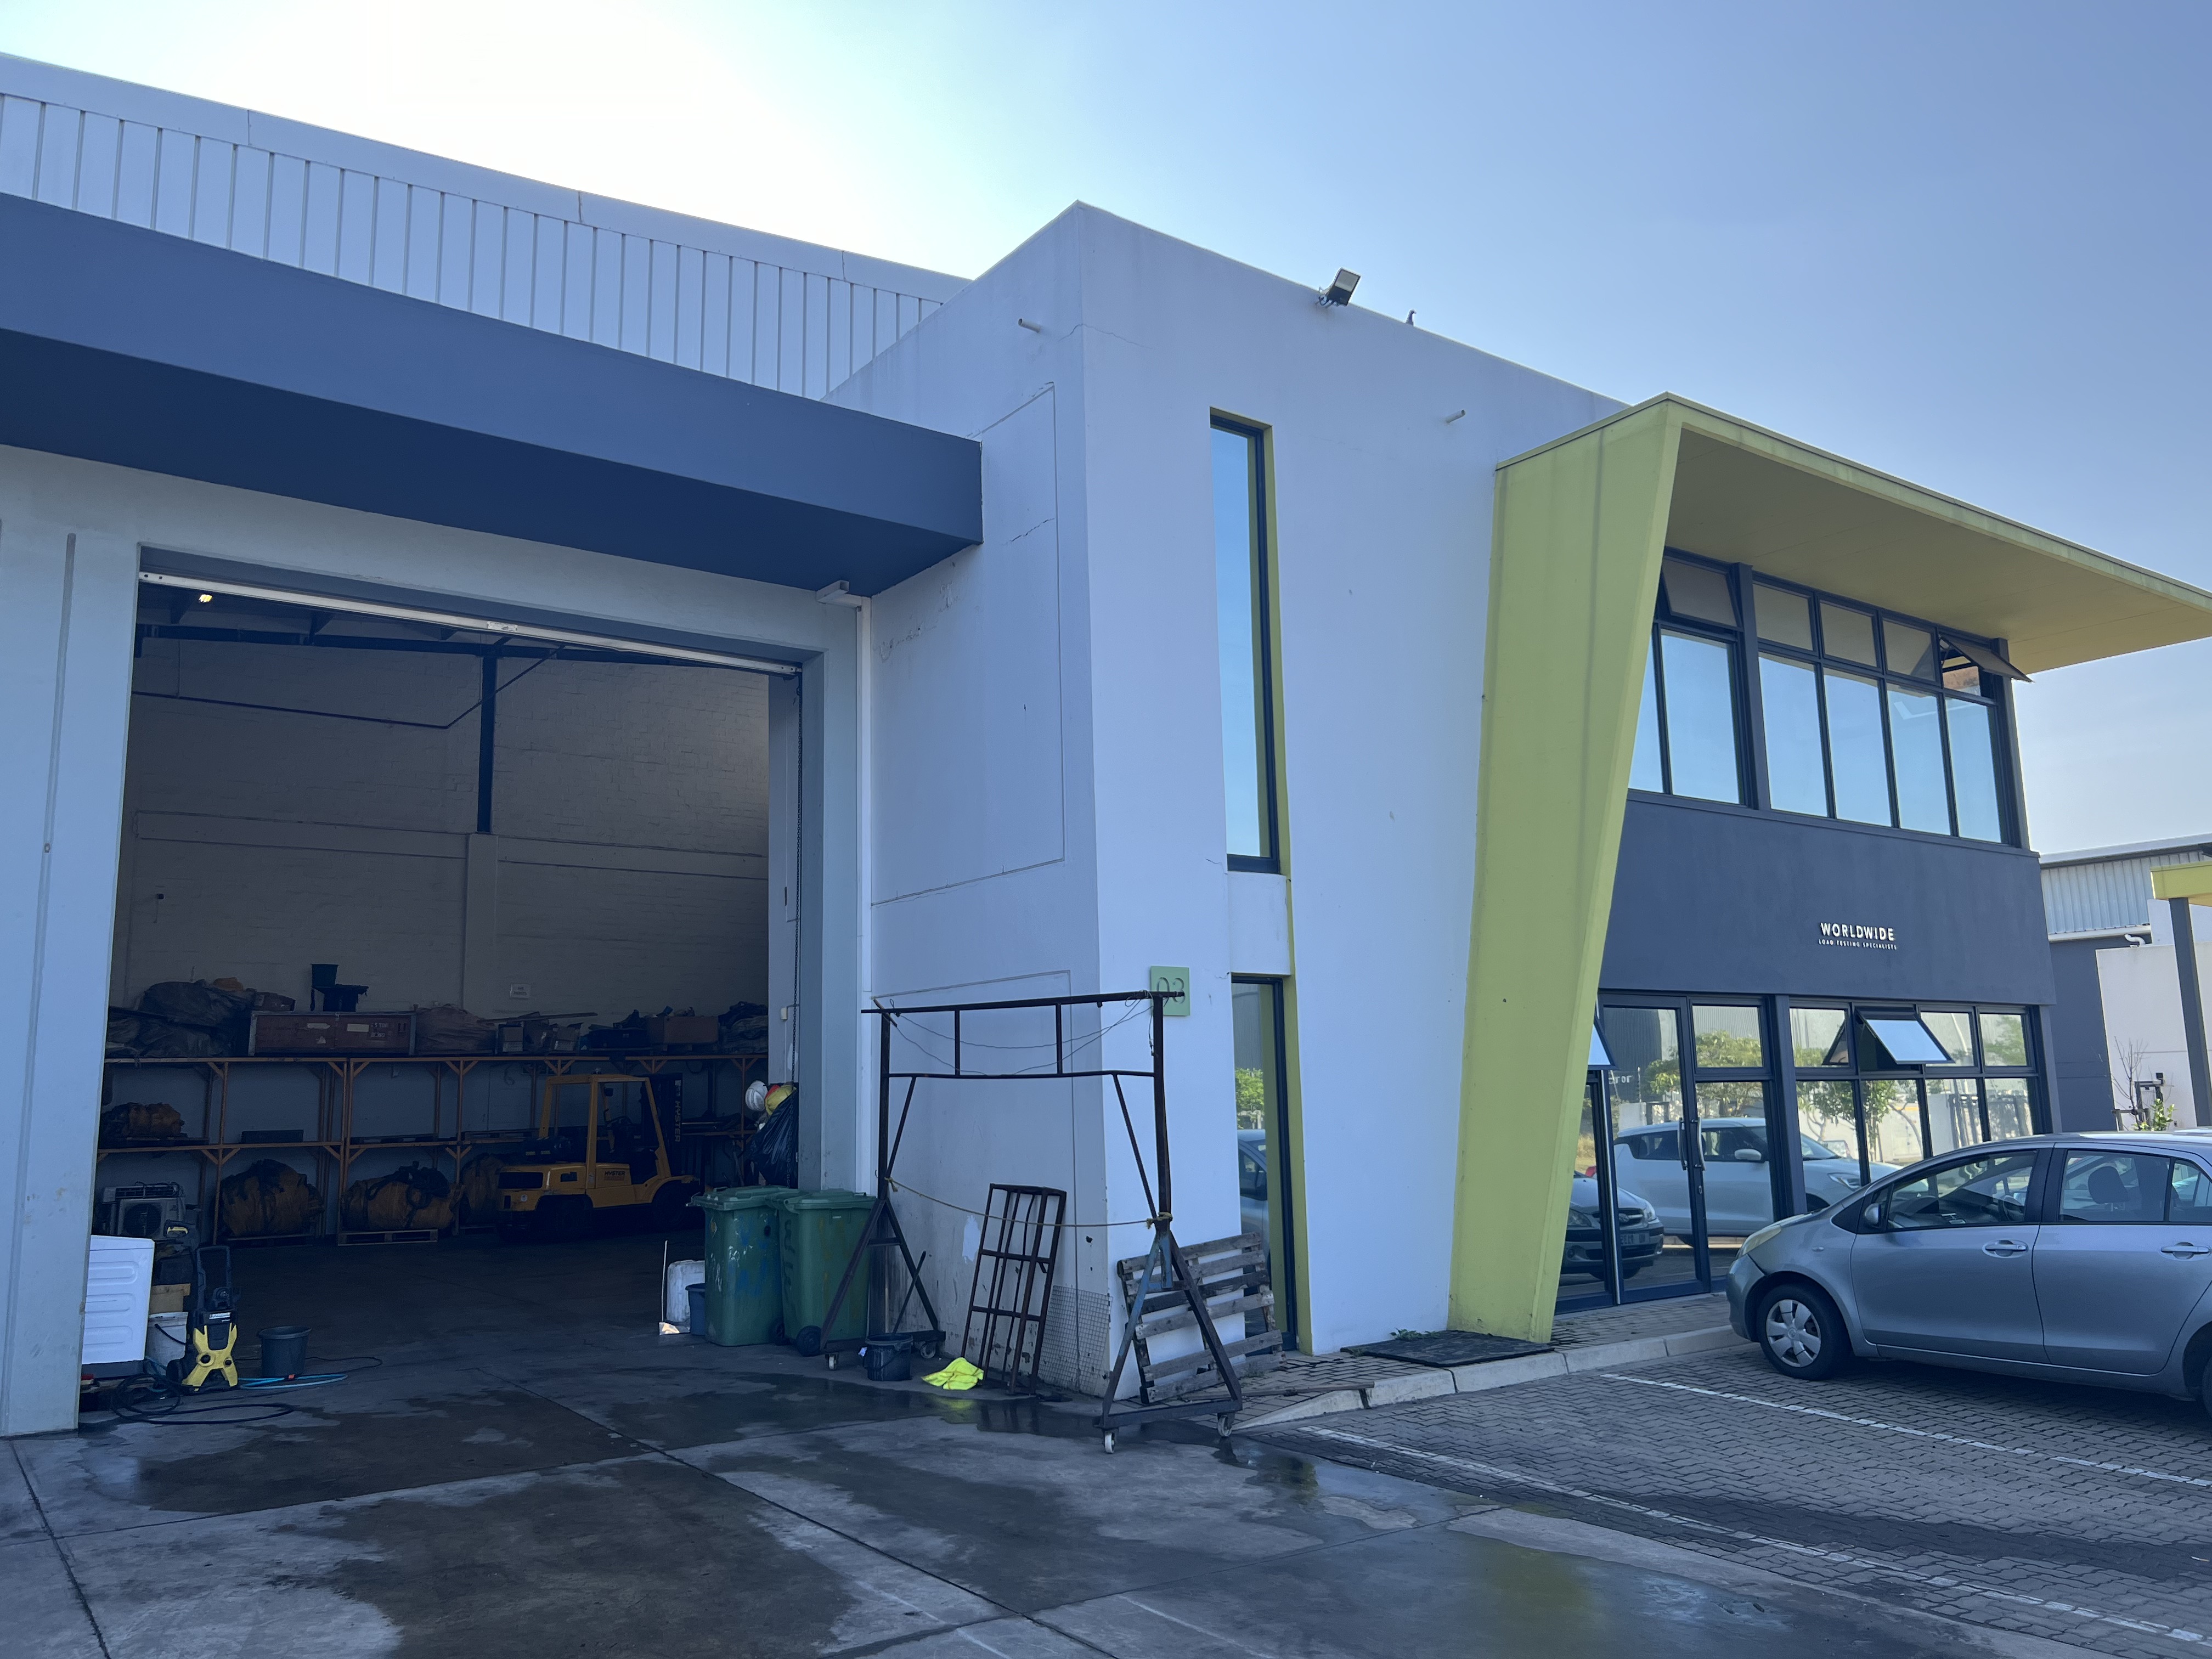 367sqm Warehouse in Vision Business Park